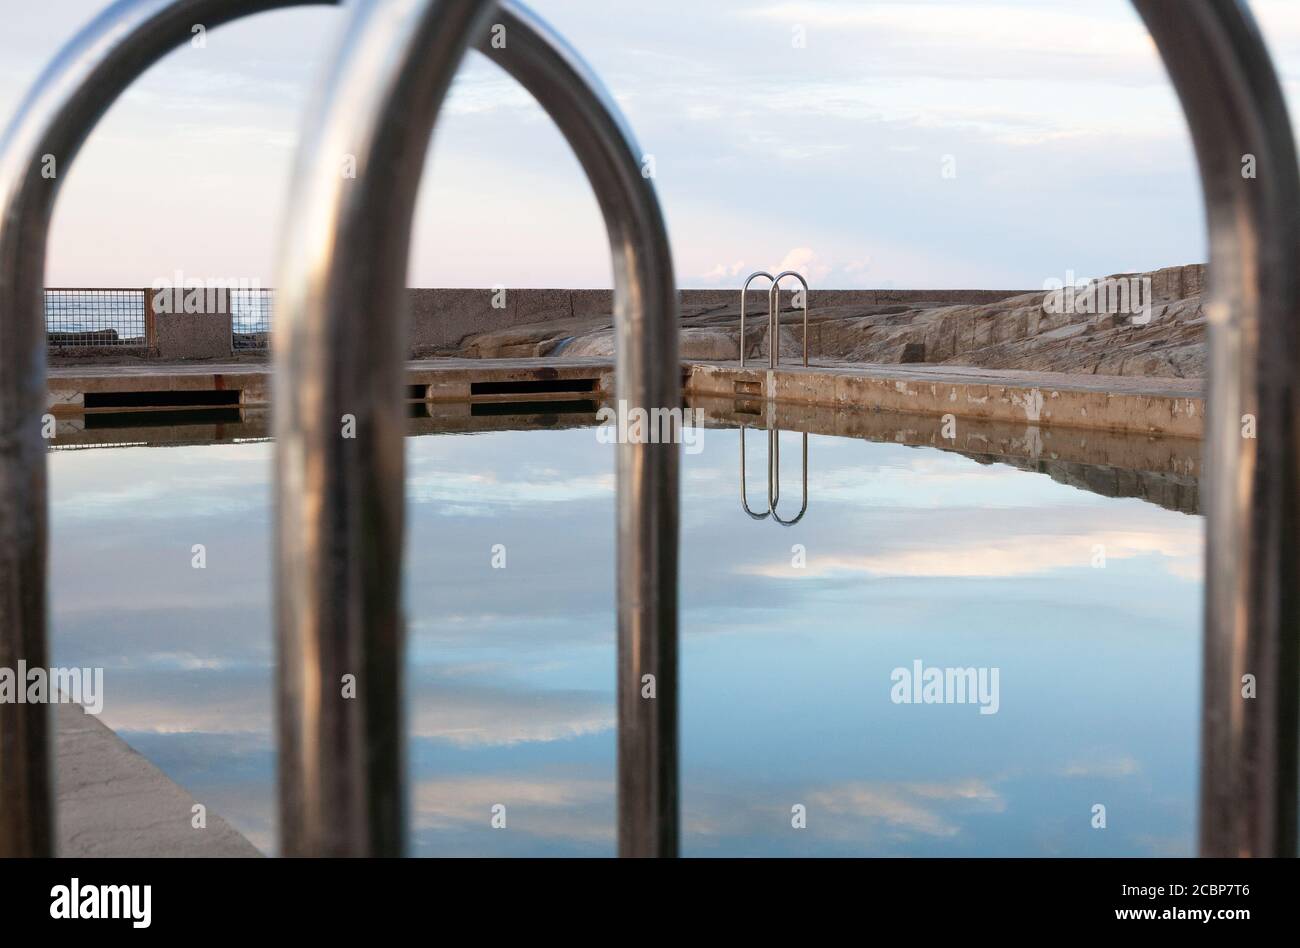 Refections at the Ocean Pool, Yamba, New South Wales, Australia Stock Photo